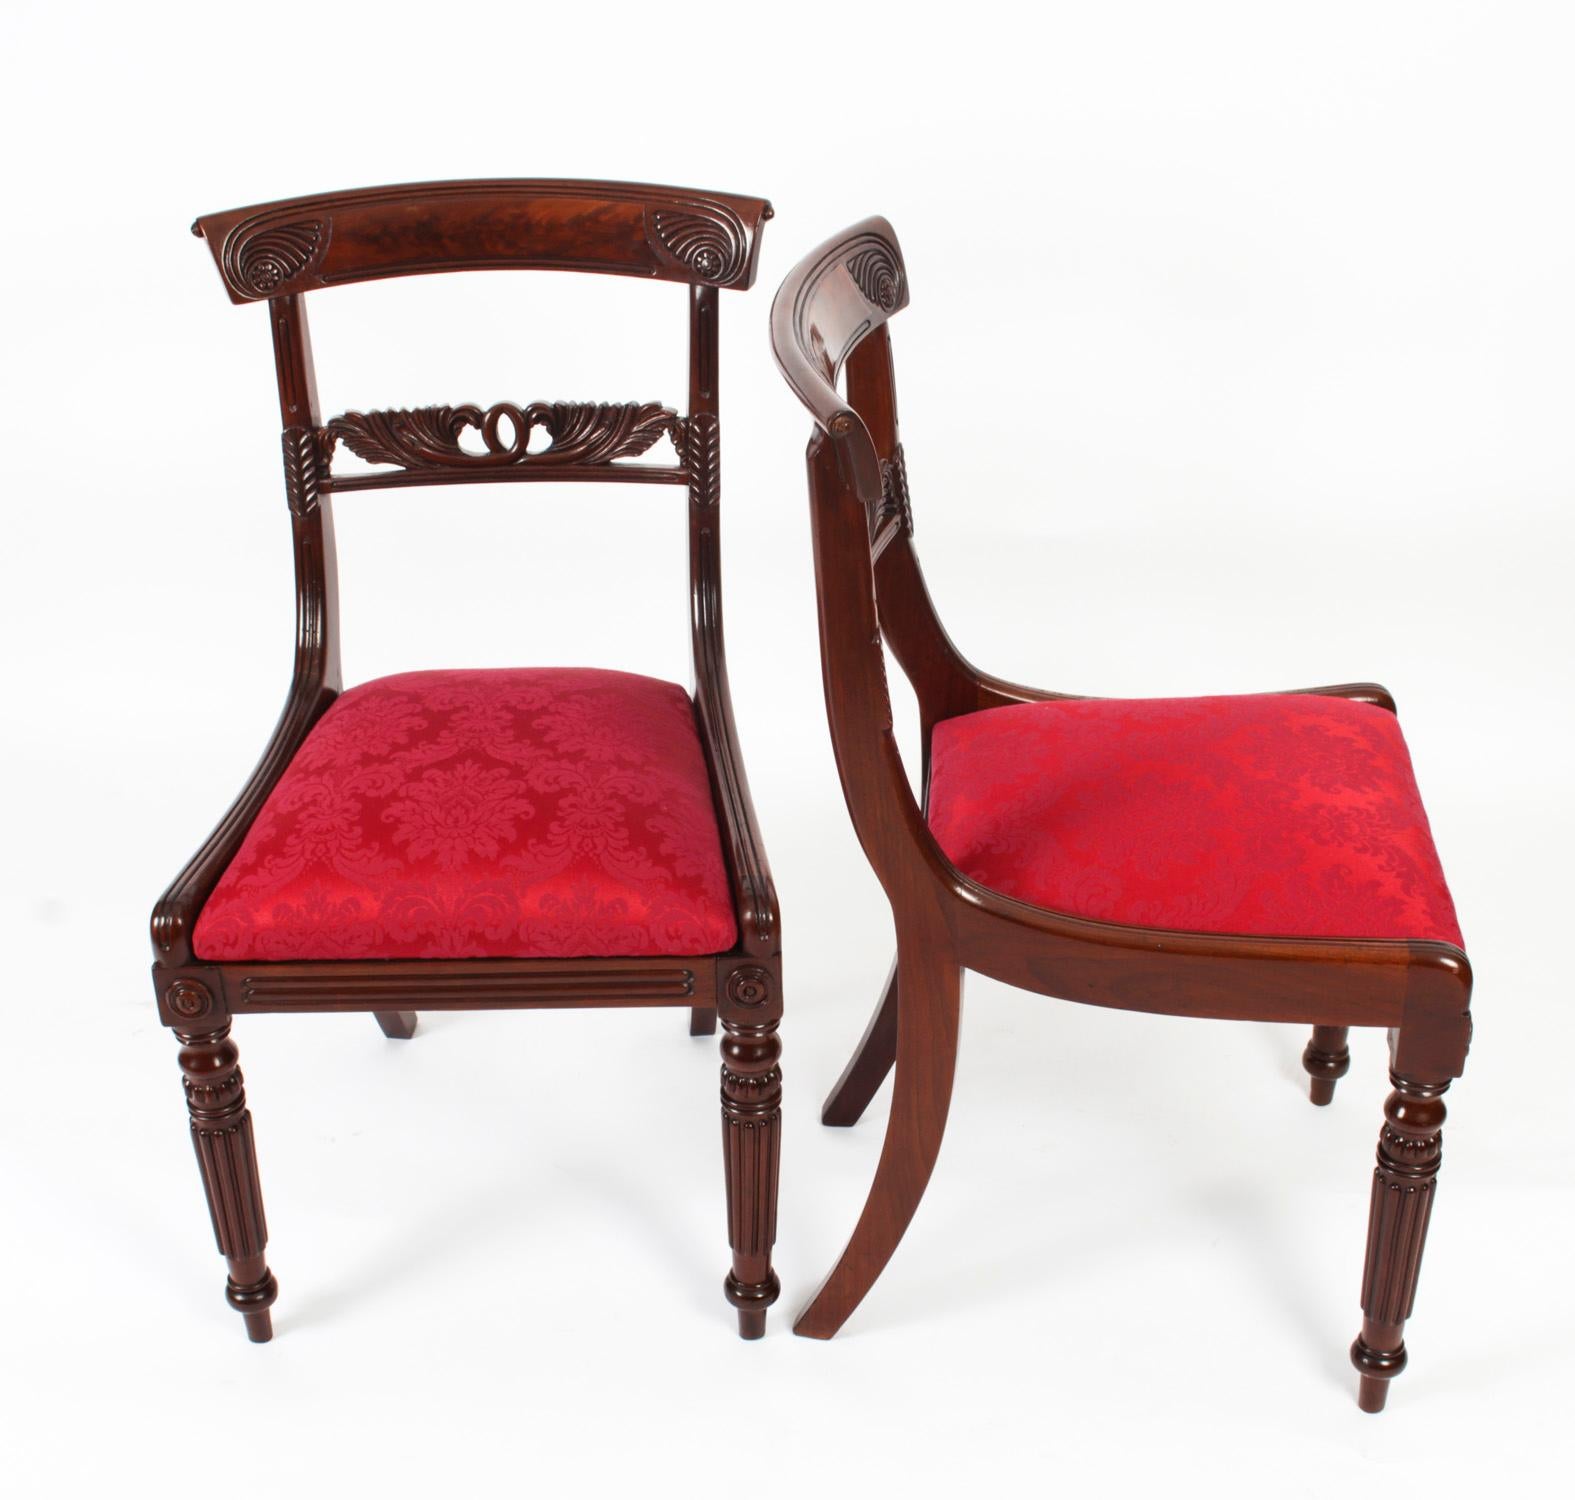 This is a rare set of eight antique English Regency dining chairs, in the manner of Gillows, comprising six side chairs and a pair of armchairs, circa 1820 in date.

These chairs have been masterfully crafted in beautiful flame mahogany. They have